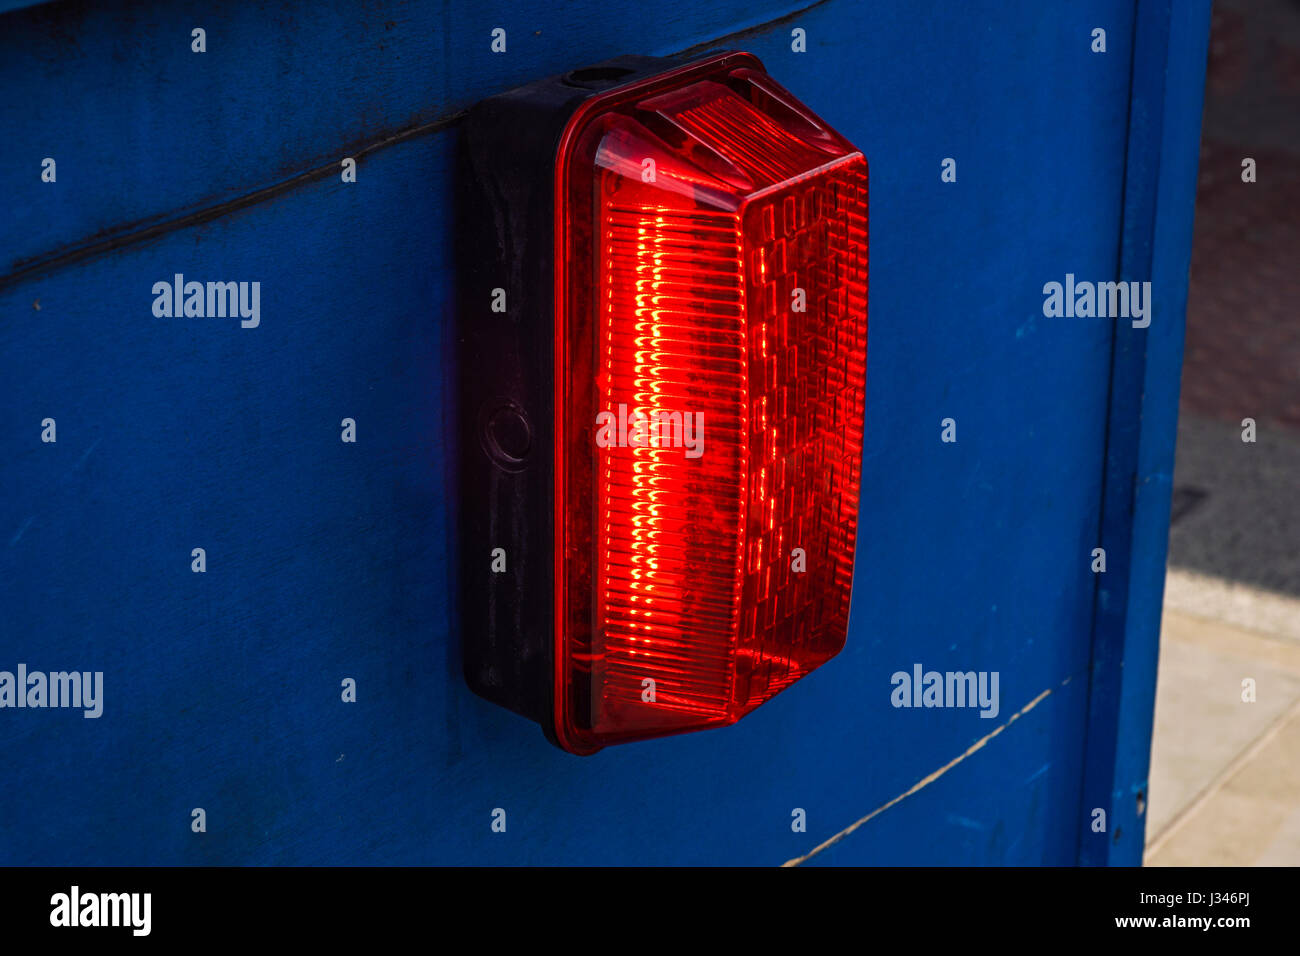 Barricade and Warning Light Closeup . traffic safety roadwork signs and light Stock Photo